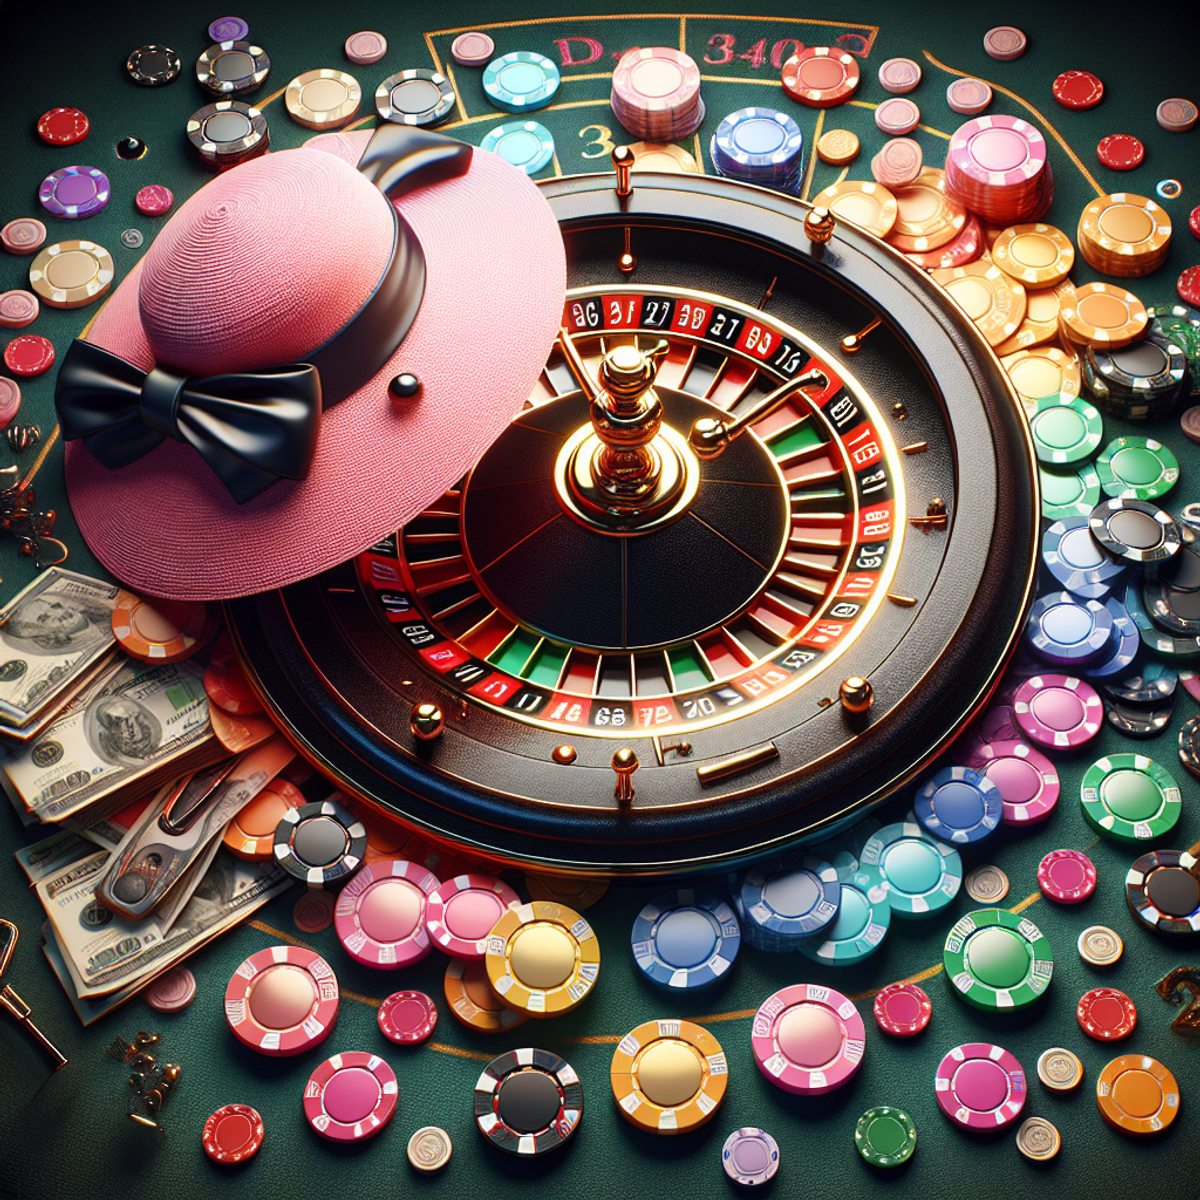 A high-quality roulette wheel with colorful sectors and vibrant gambling chips placed around and on the wheel.